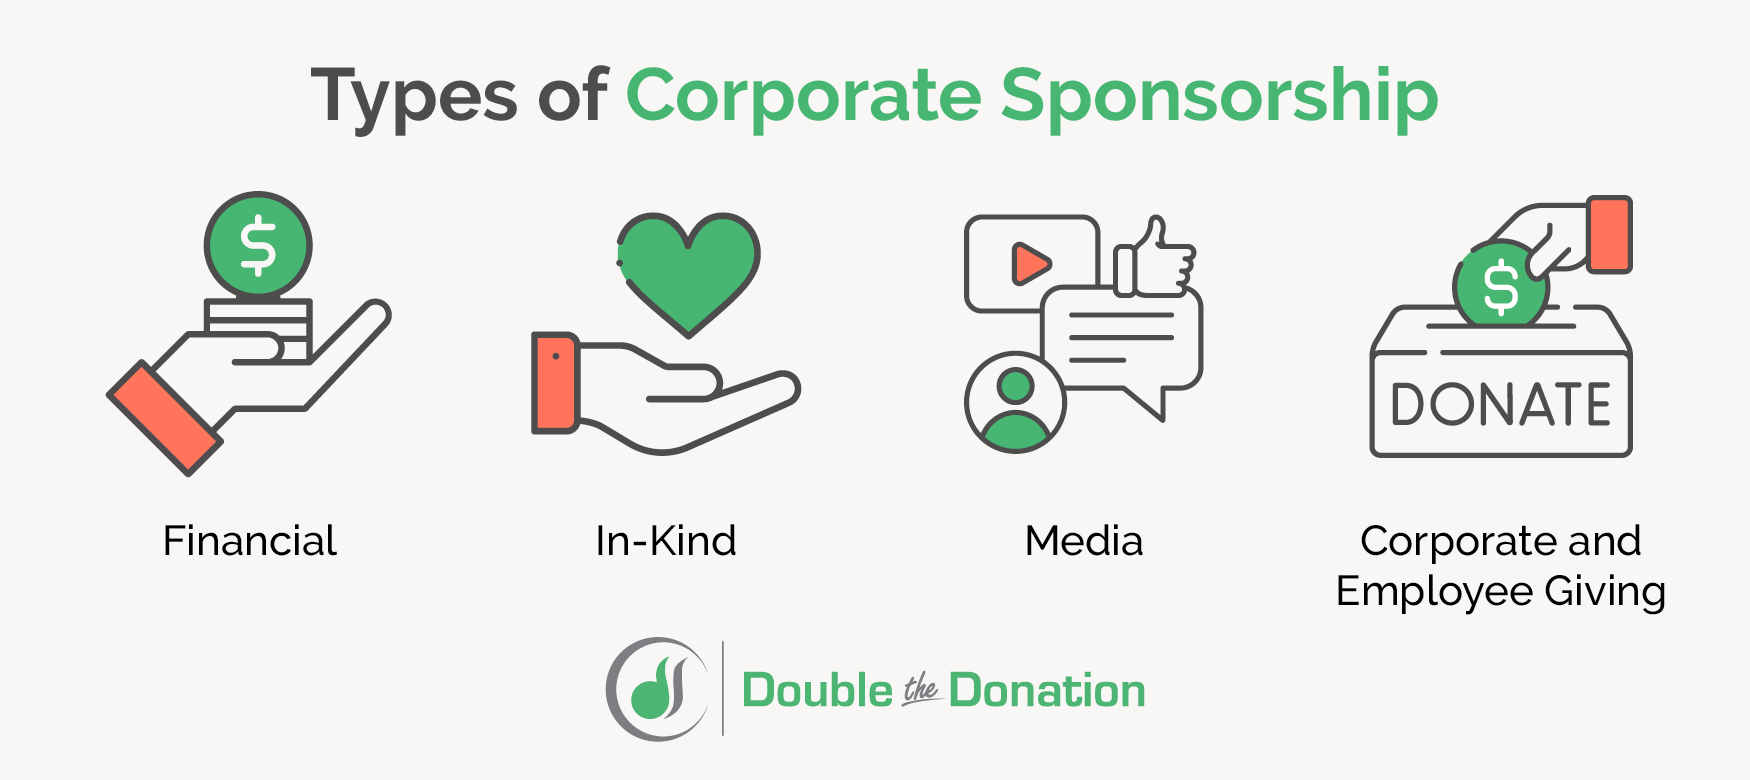 This image showcases four types of corporate sponsorship, including financial, in-kind, media, and corporate and employee giving.